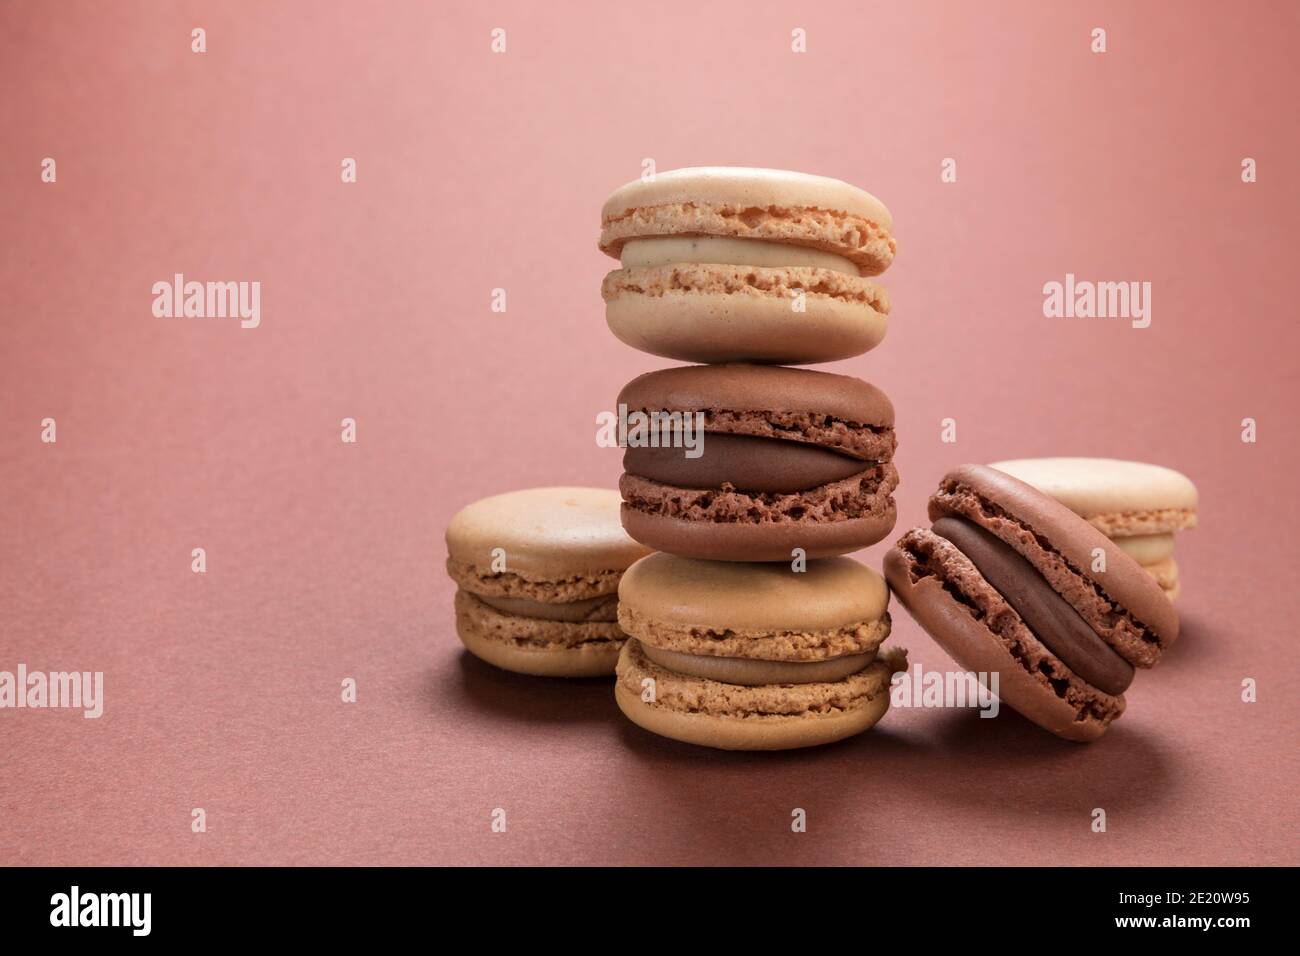 French macarons pastry with vanilla, coffee and chocolate flavours on brown background Stock Photo